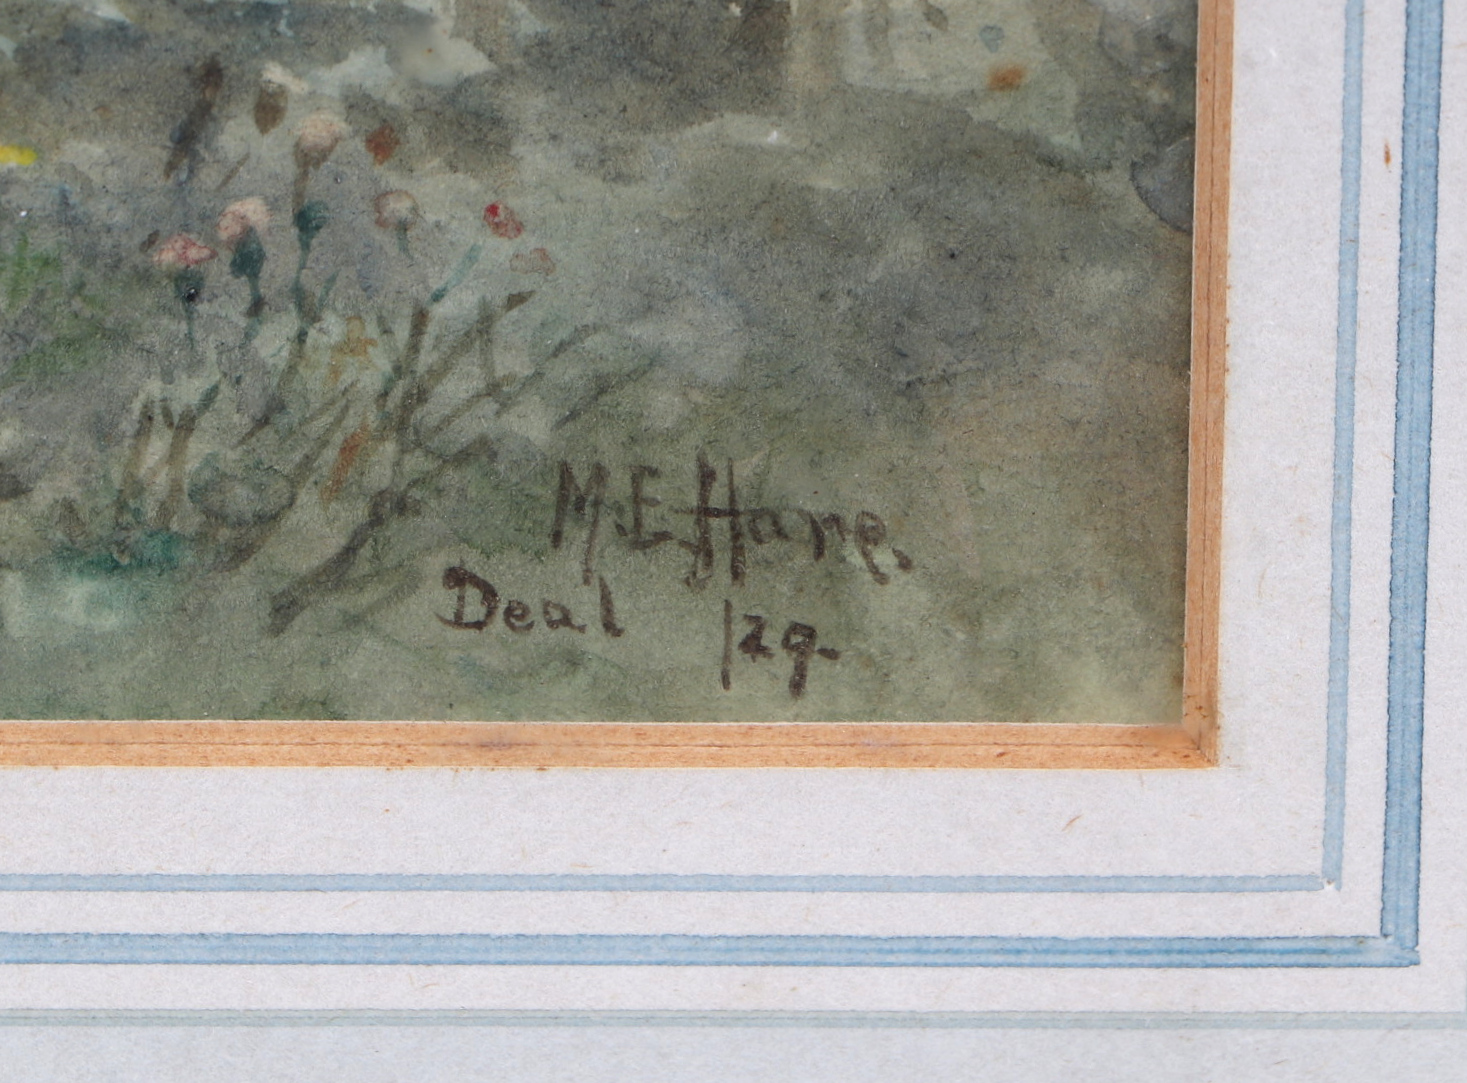 M E Hare (Early 20th century British) - Deal, Kent, Cliffside Walk- signed and dated lower right - Image 3 of 4